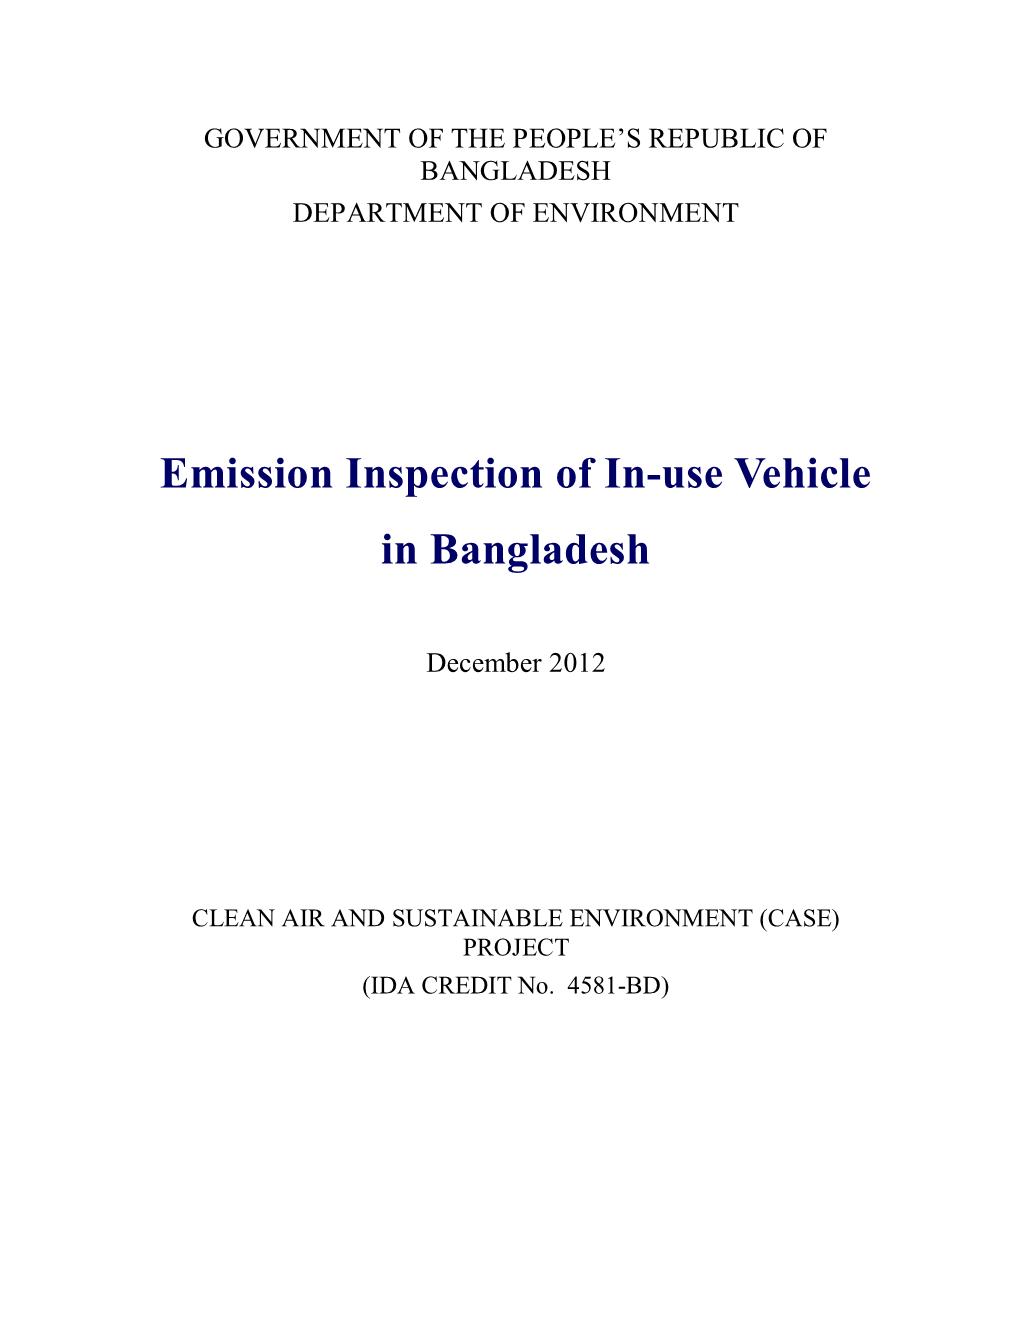 Emission Inspection of In-Use Vehicle in Bangladesh